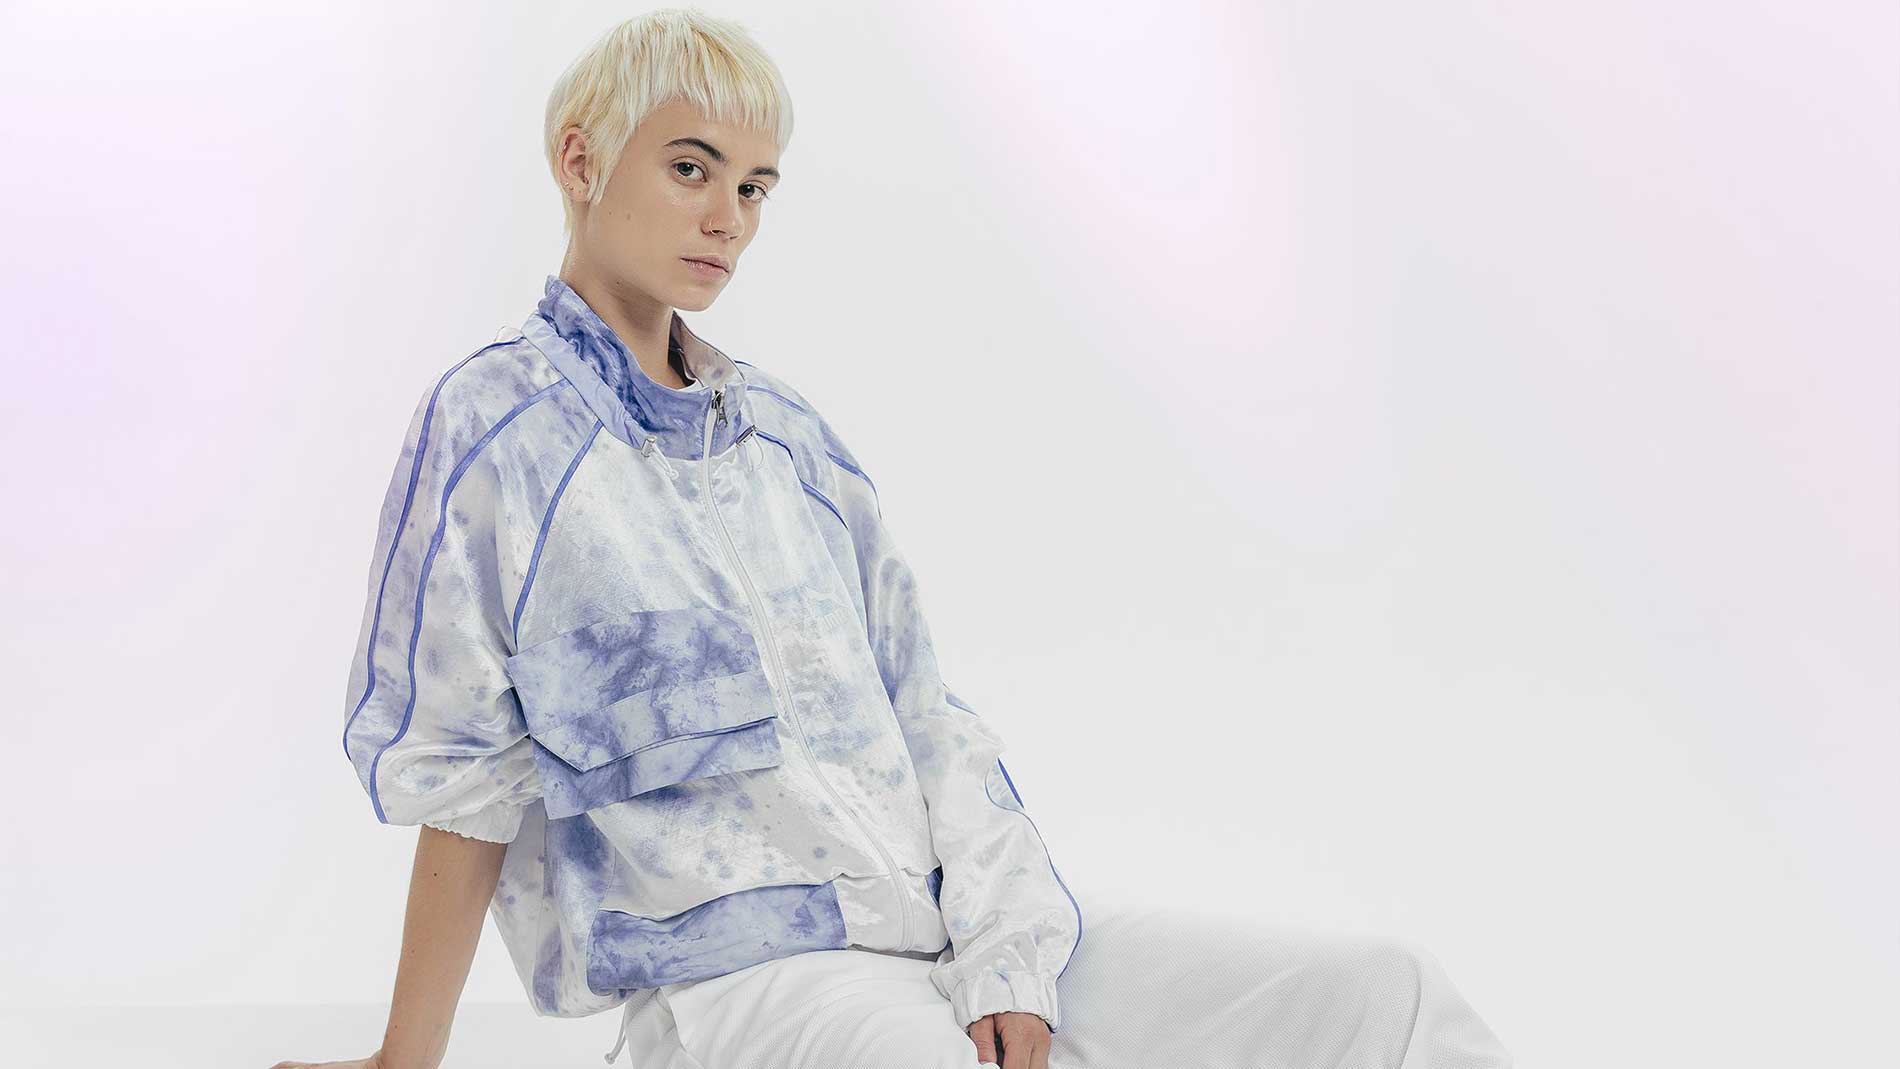 Design to Fade uses bacteria to dye textiles. It is PUMA’s third biodesign project and has been made in collaboration with Dutch design project Living Colour.